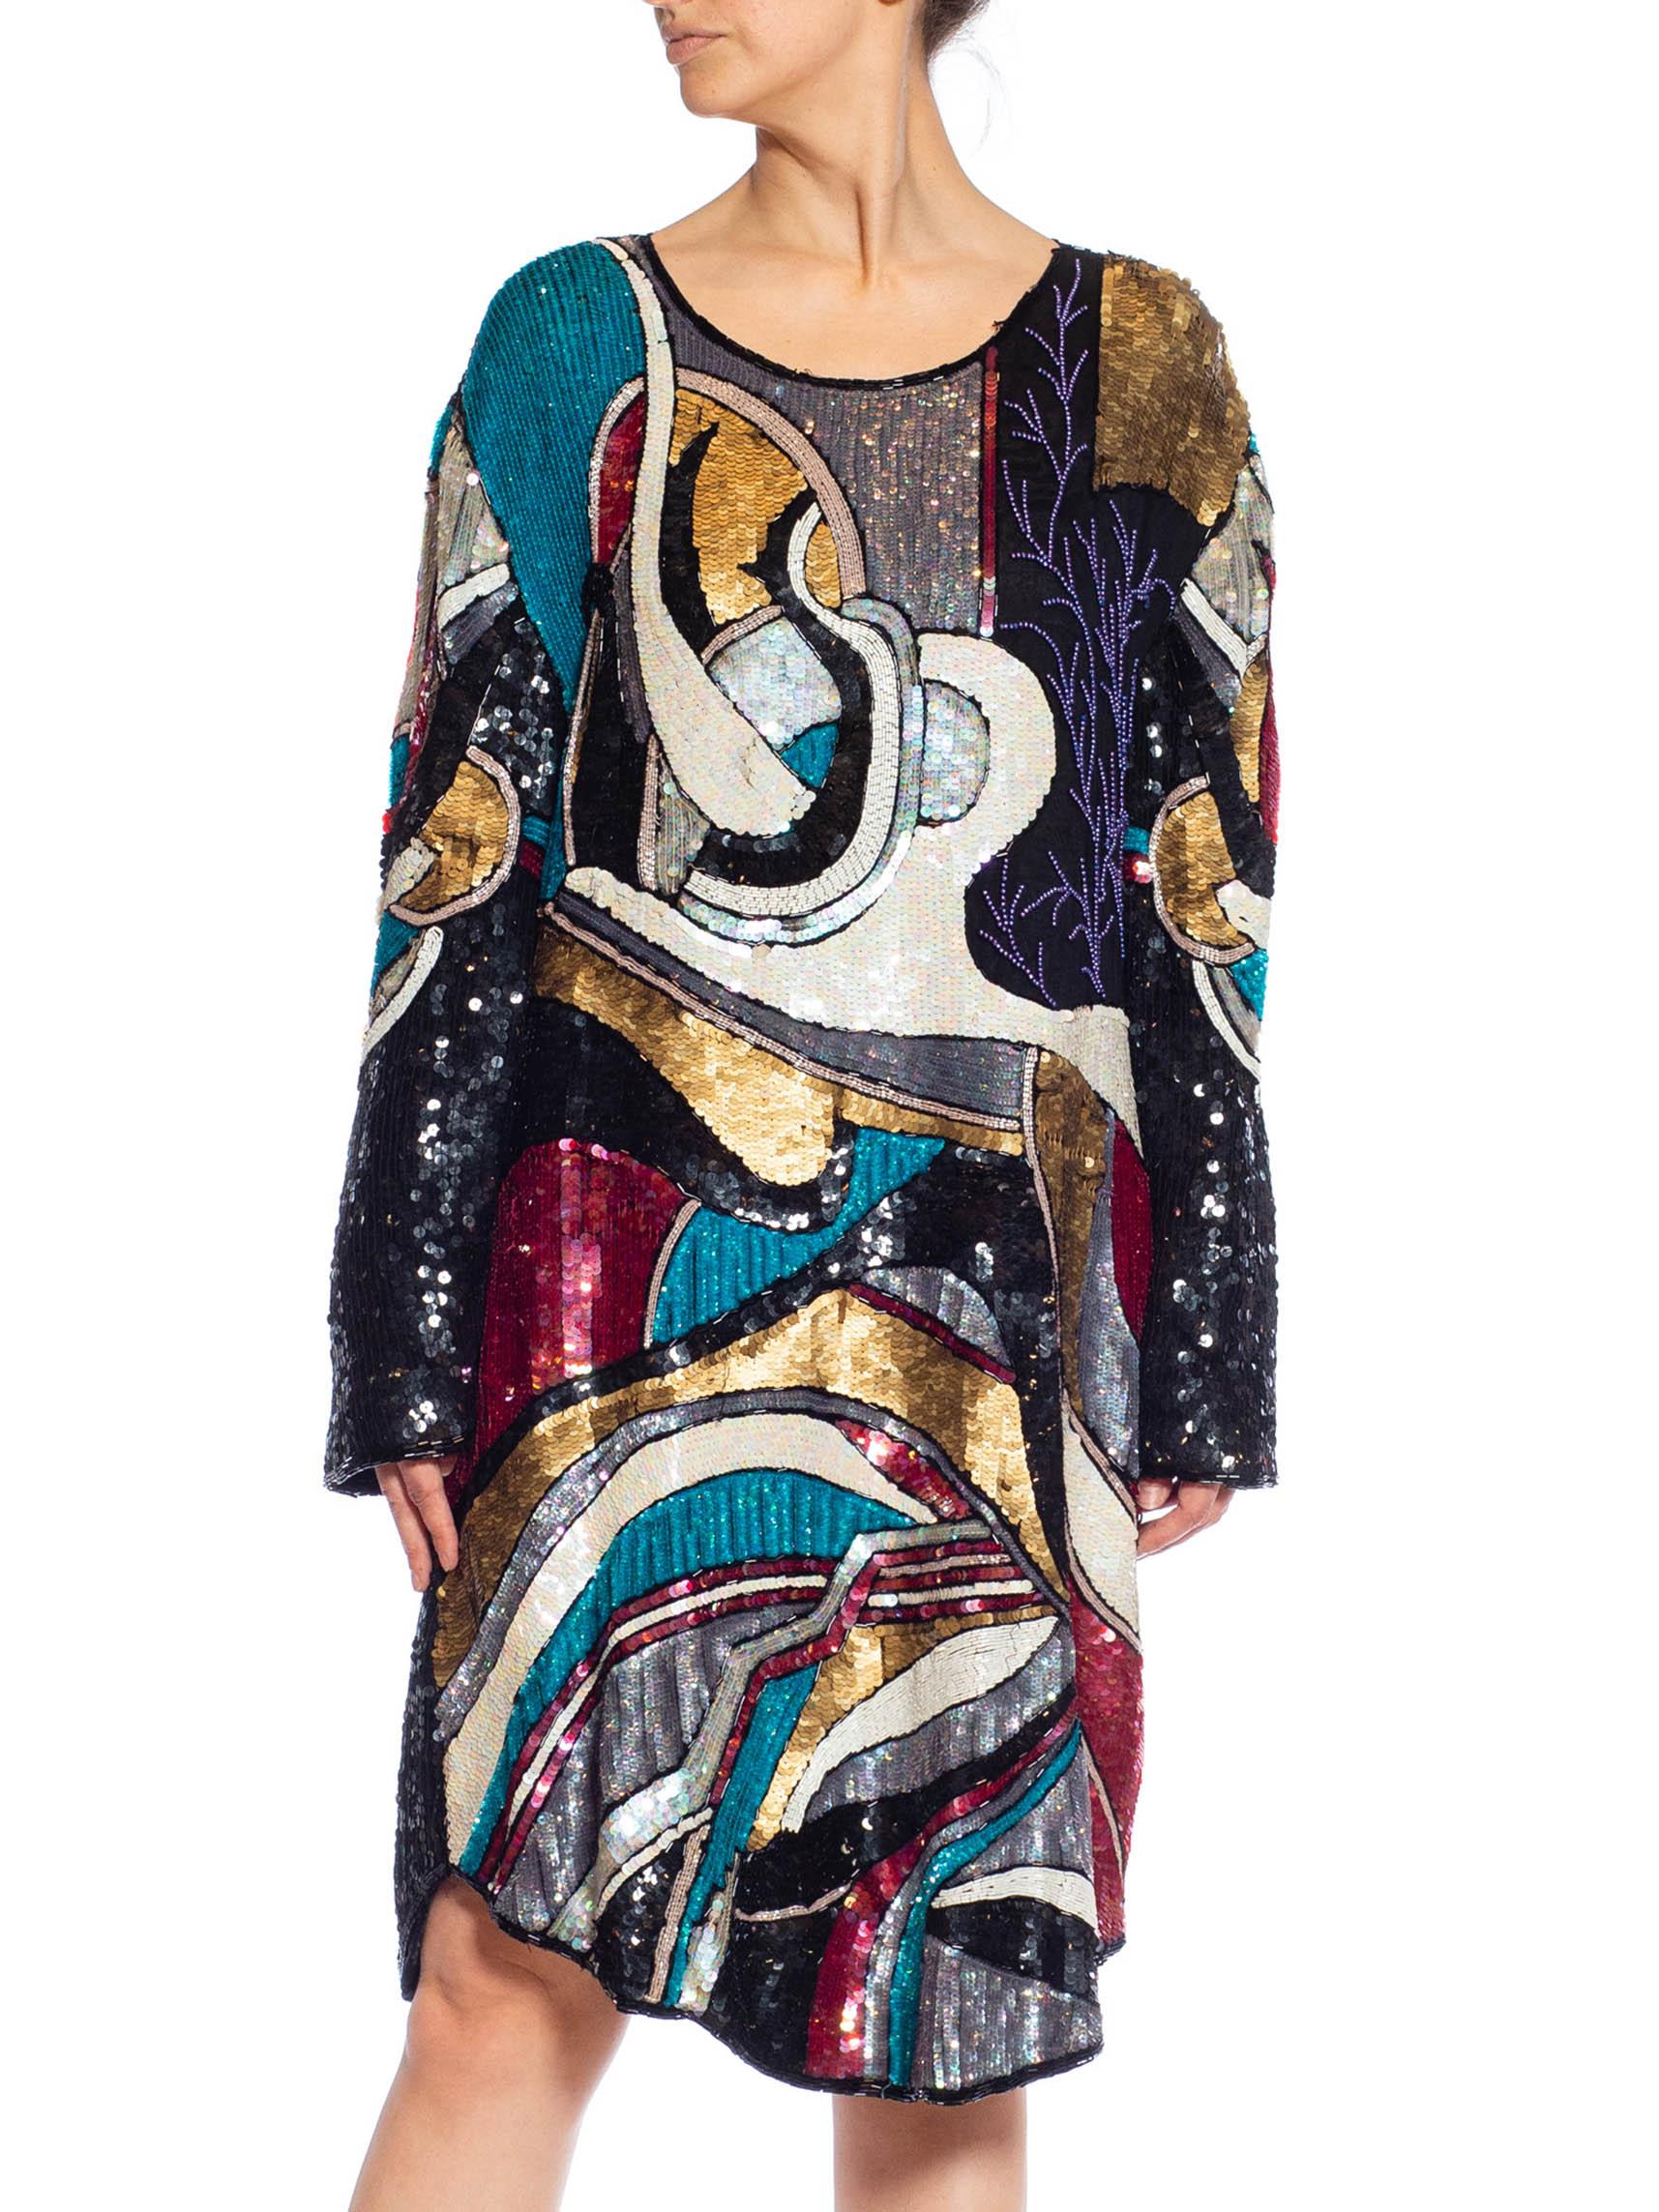 1980S Black & White Multicolored Beaded Silk Abstract Art Cocktail Dress For Sale 1